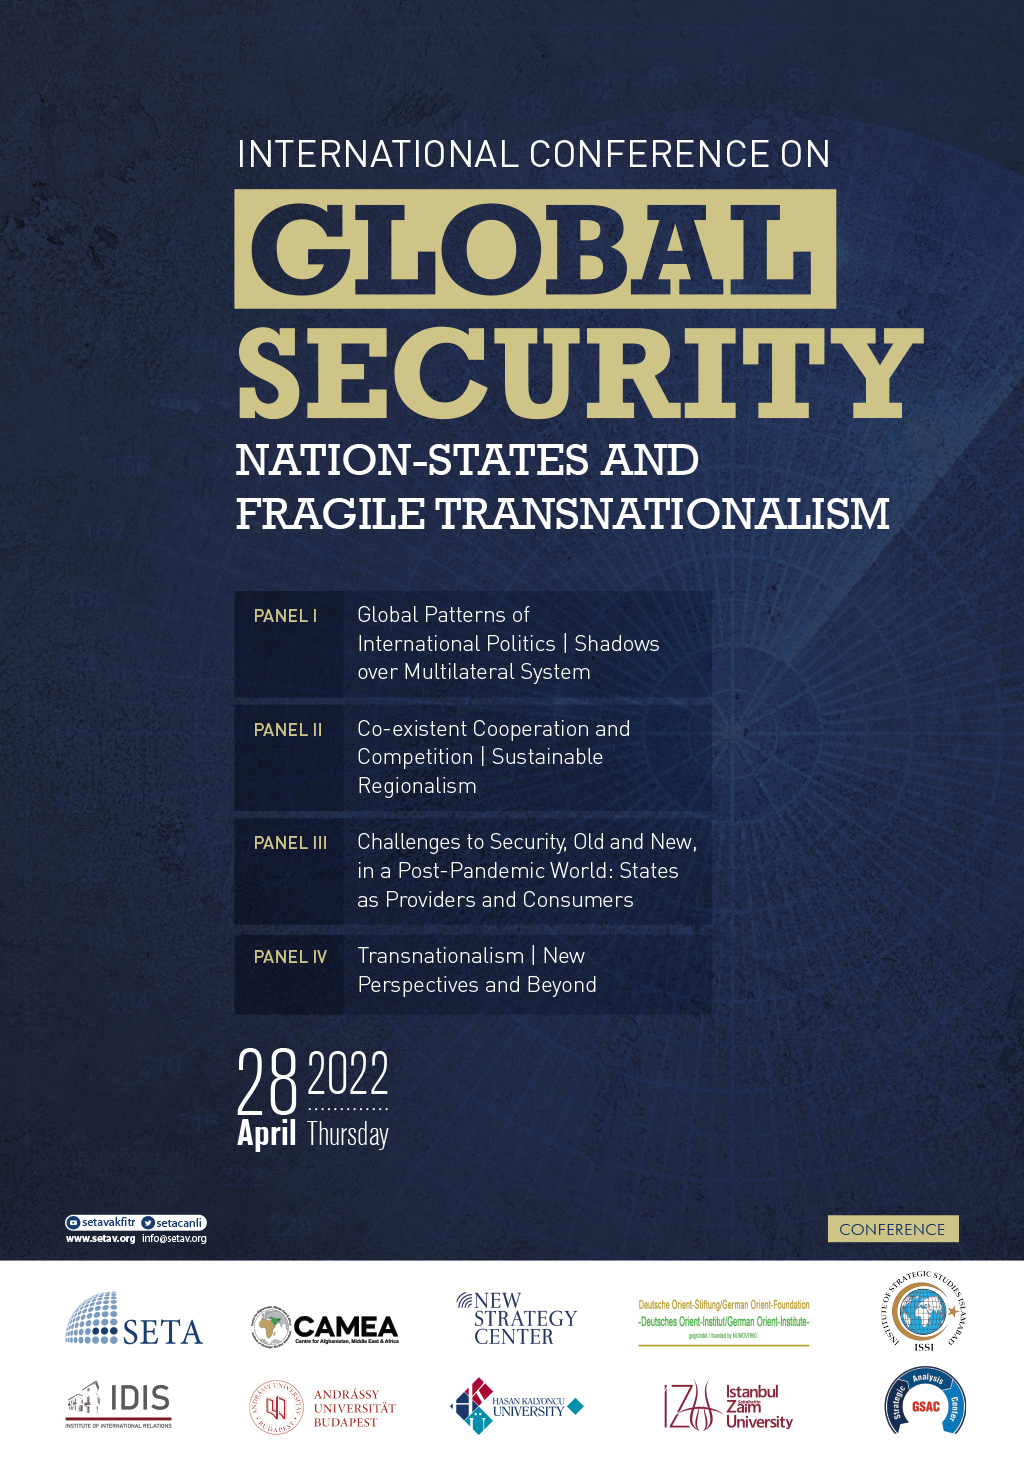 INTERNATIONAL CONFERENCE ON ‘GLOBAL’ SECURITY:  Nation-States and Fragile Transnationalism